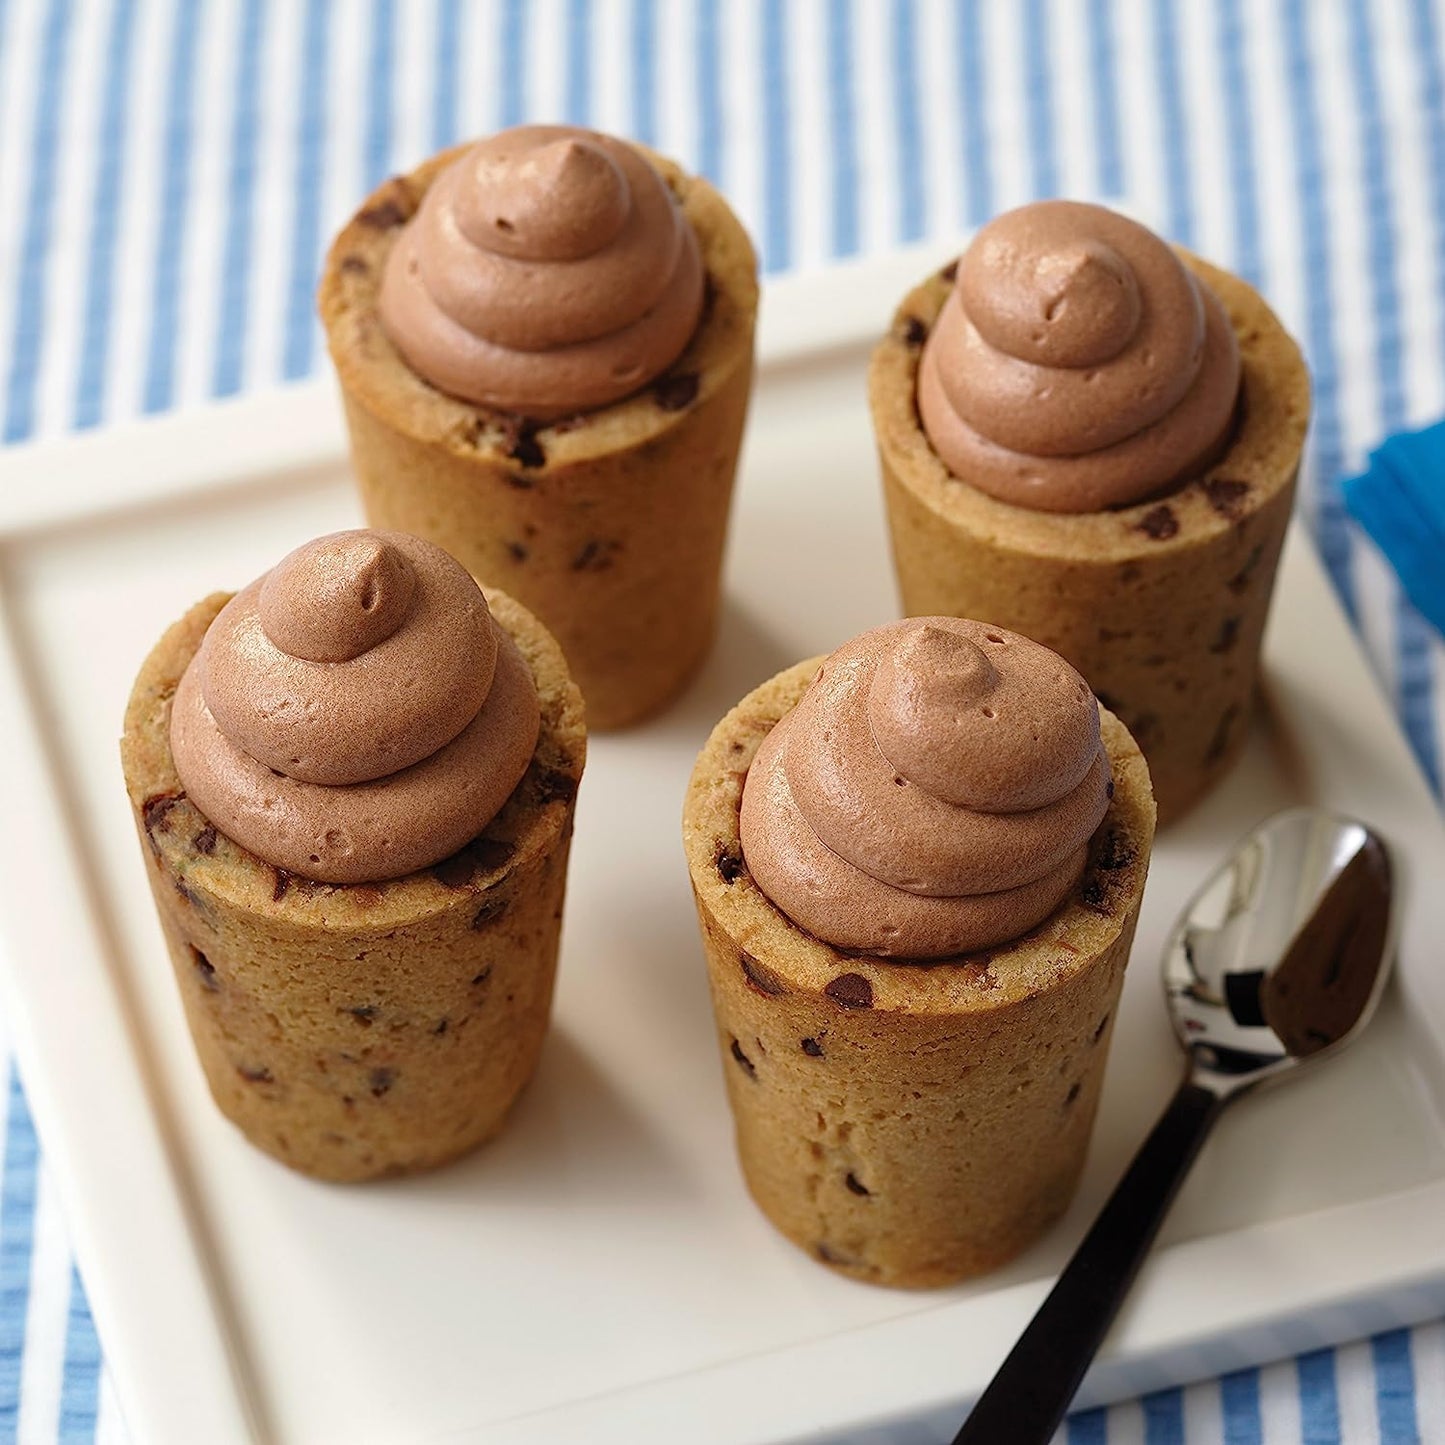 Four cookie shot glasses filled with chocolate mousse.